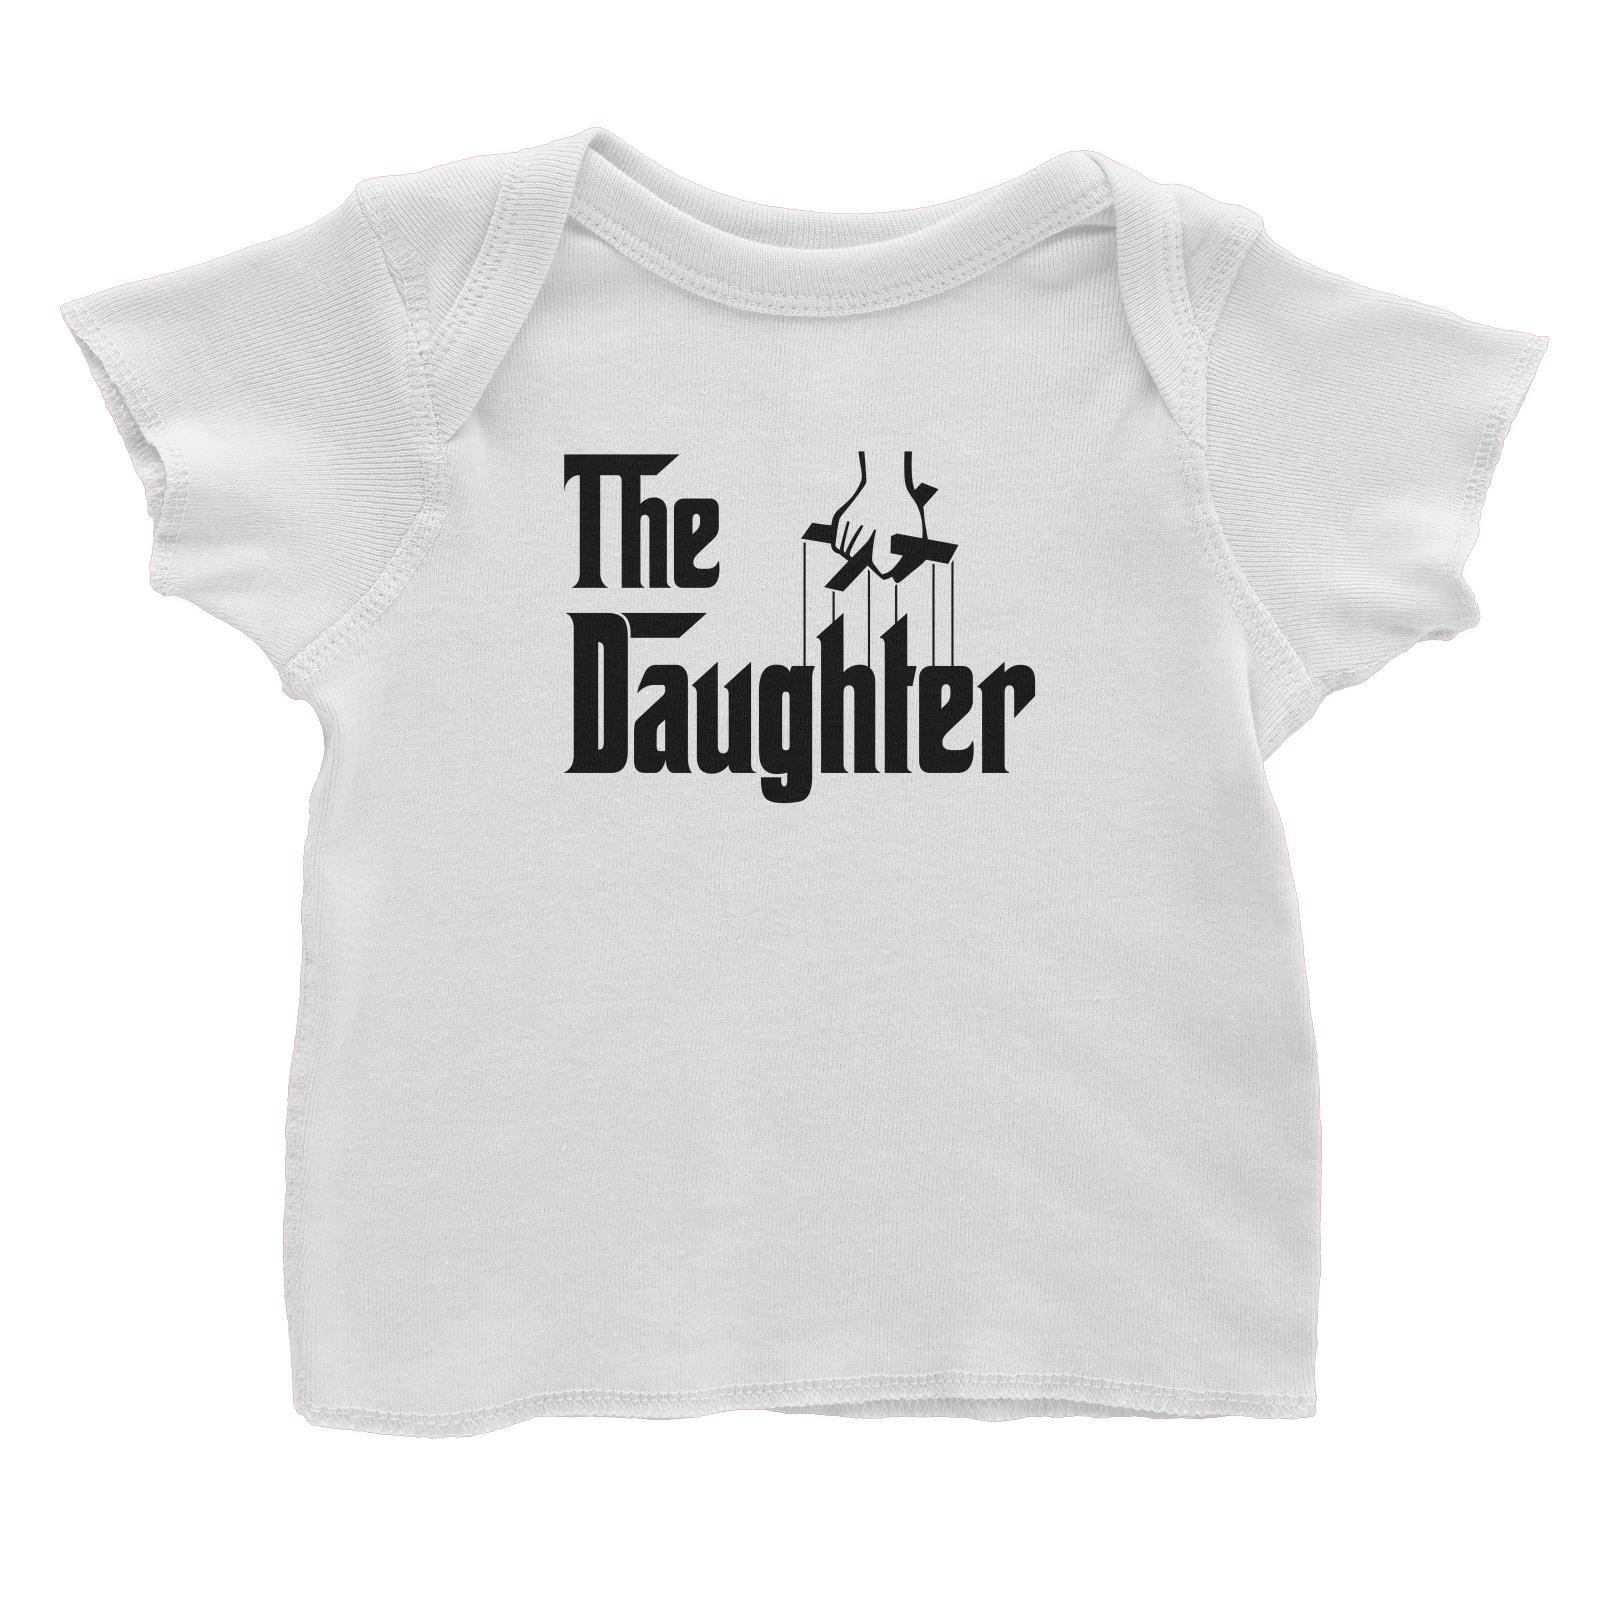 The Daughter Baby T-Shirt Godfather Matching Family